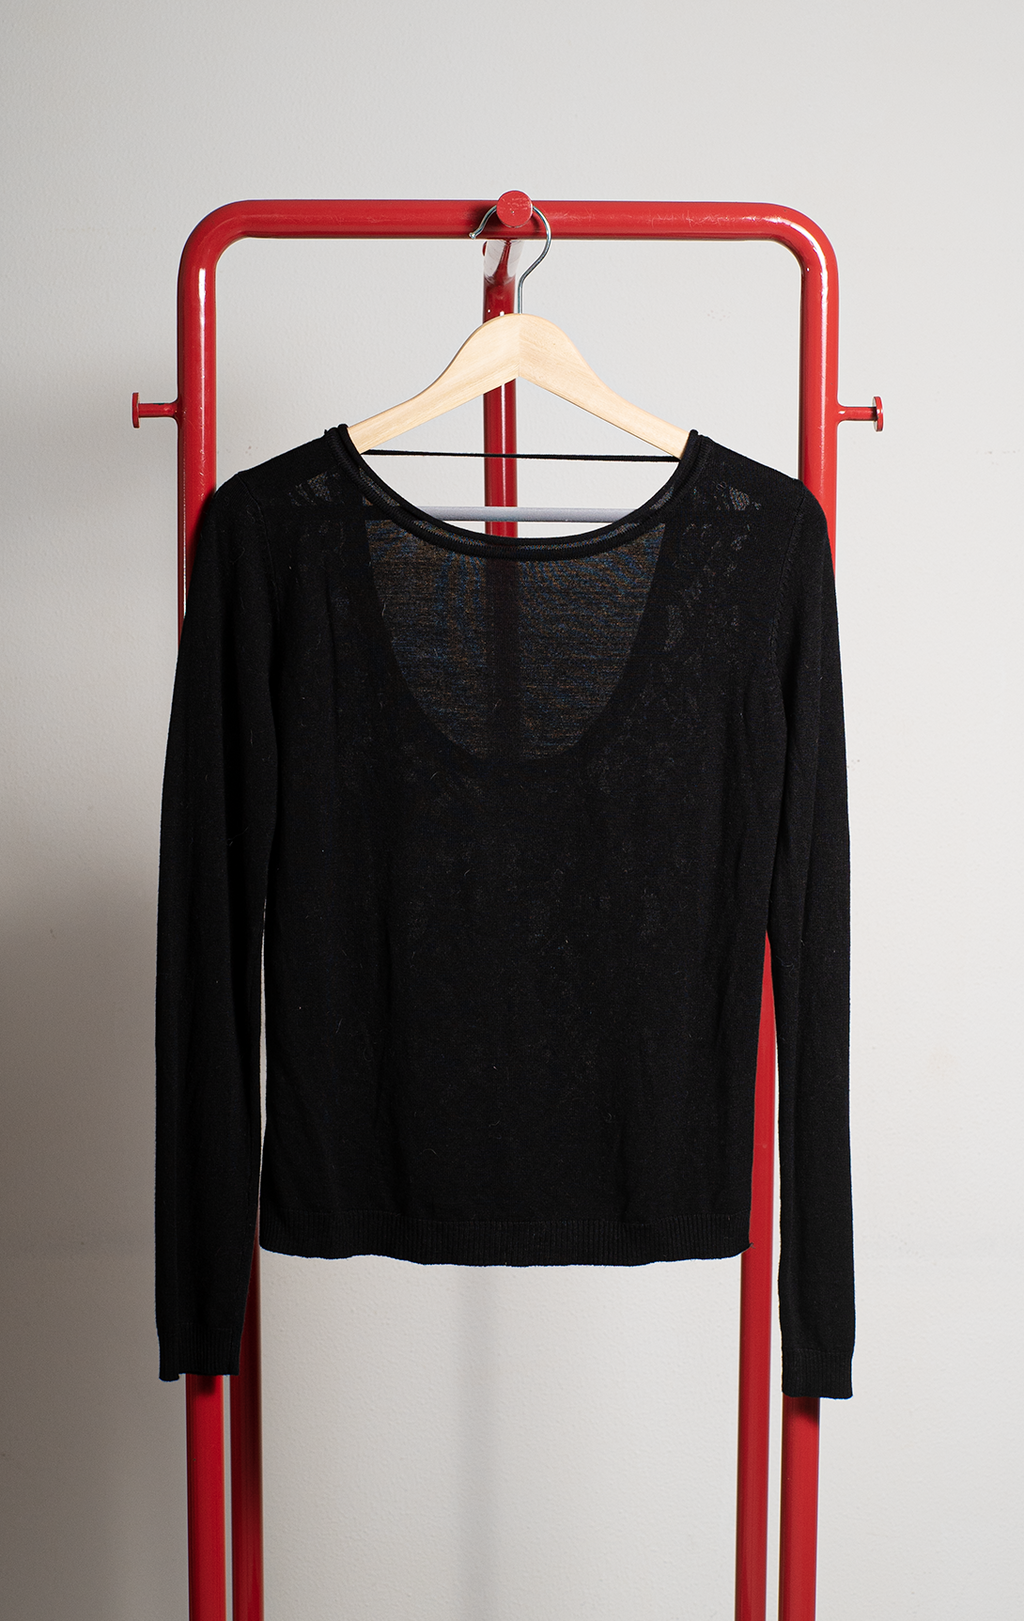 TOP - Black with lace back side - Small